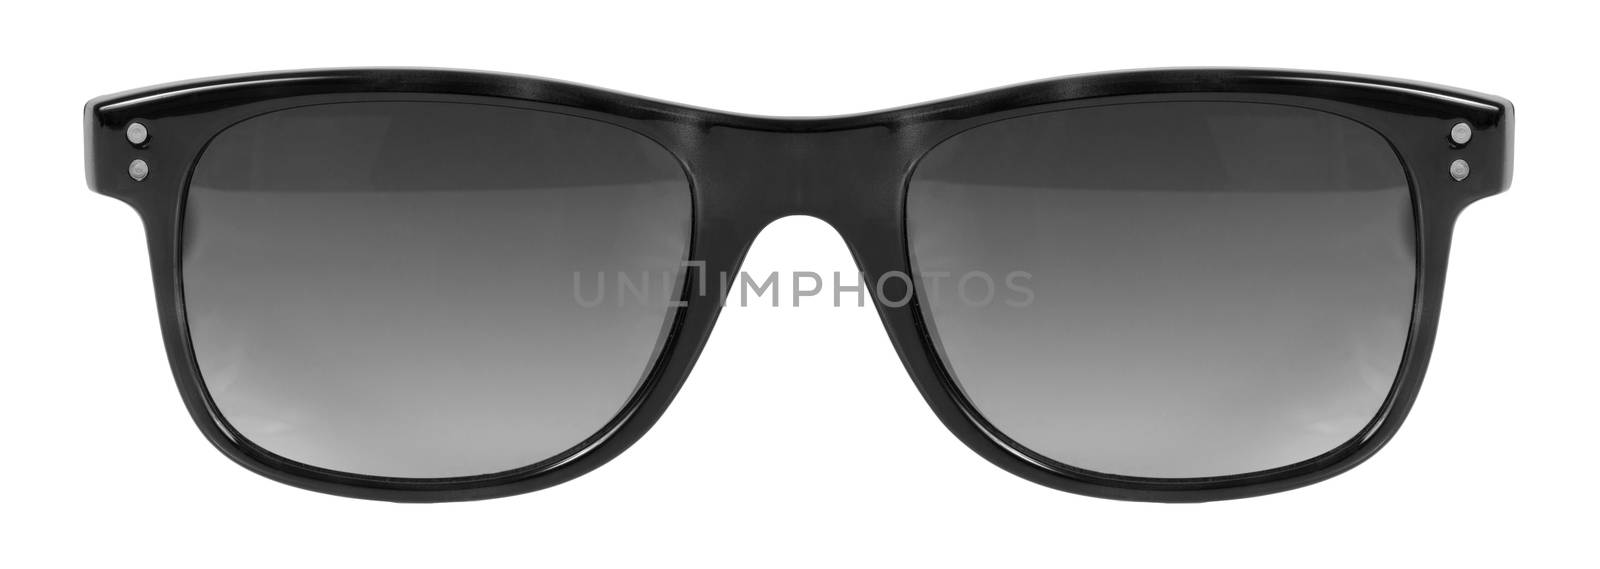 Sunglasses black frame and grey color lens isolated against a clean white background nobody